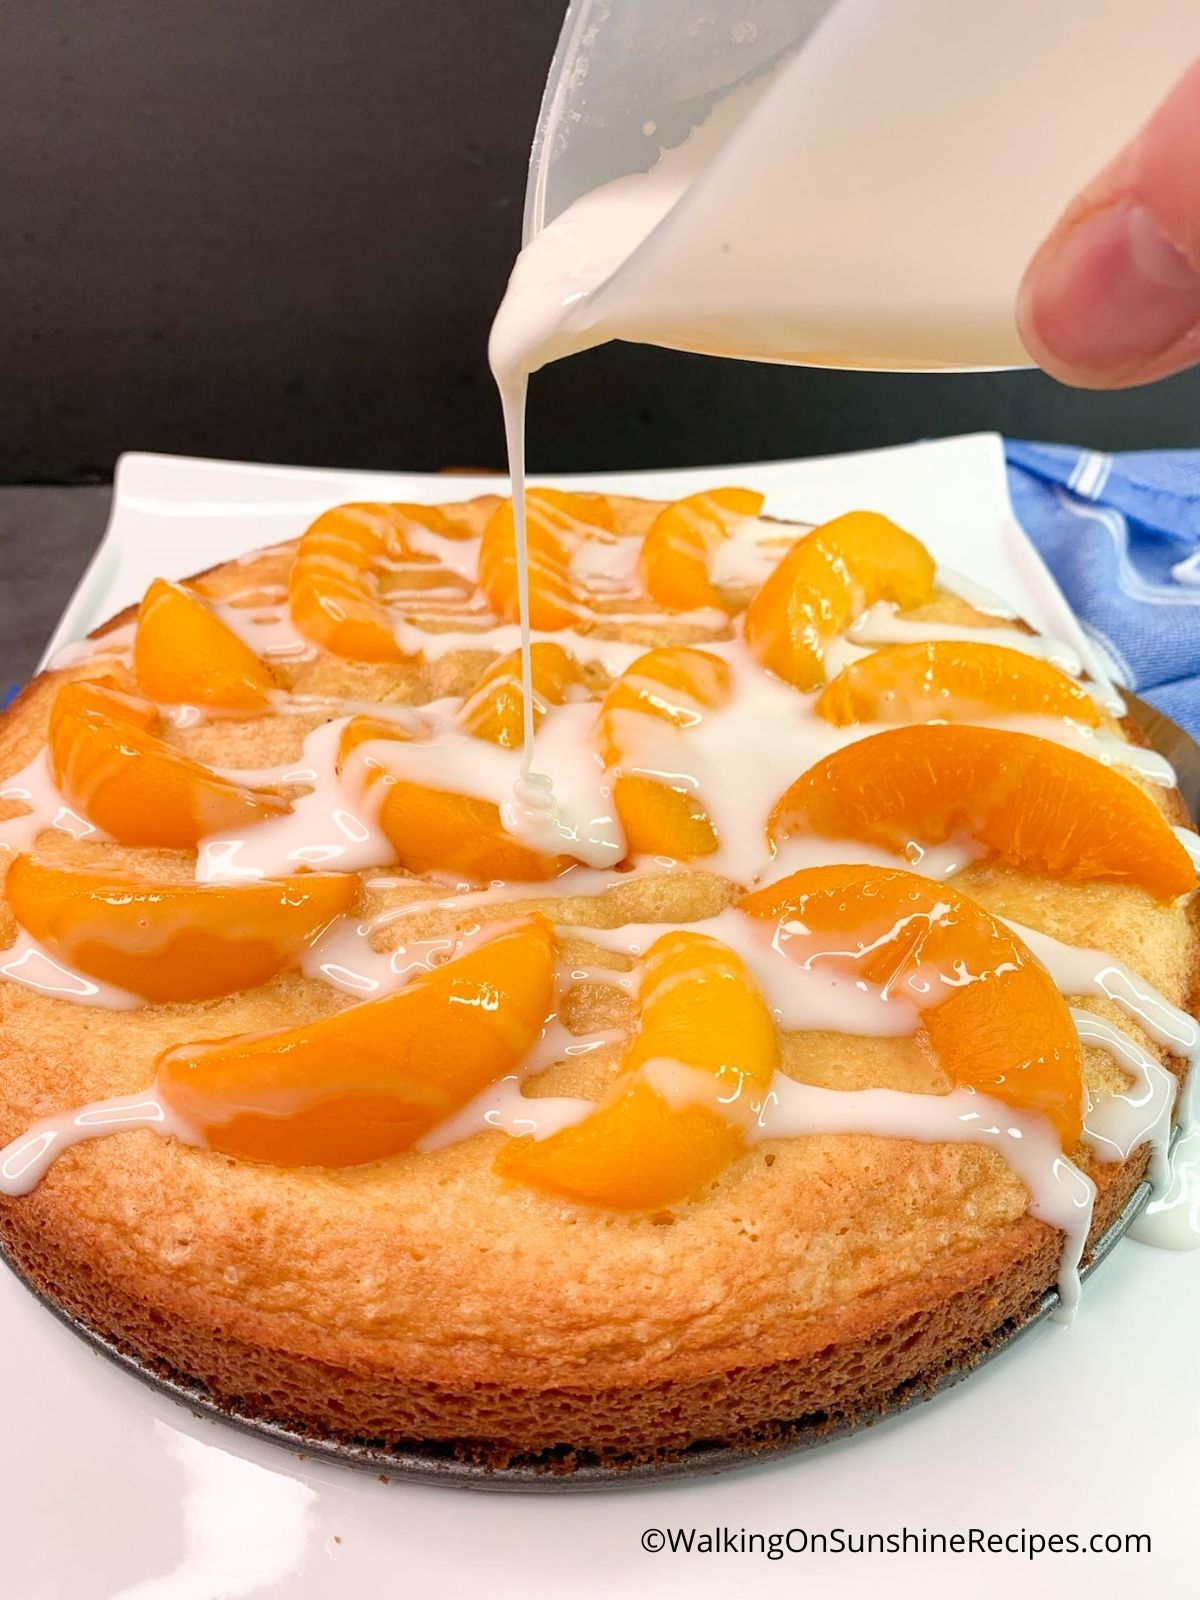 Pour glaze on top of baked peach cake.